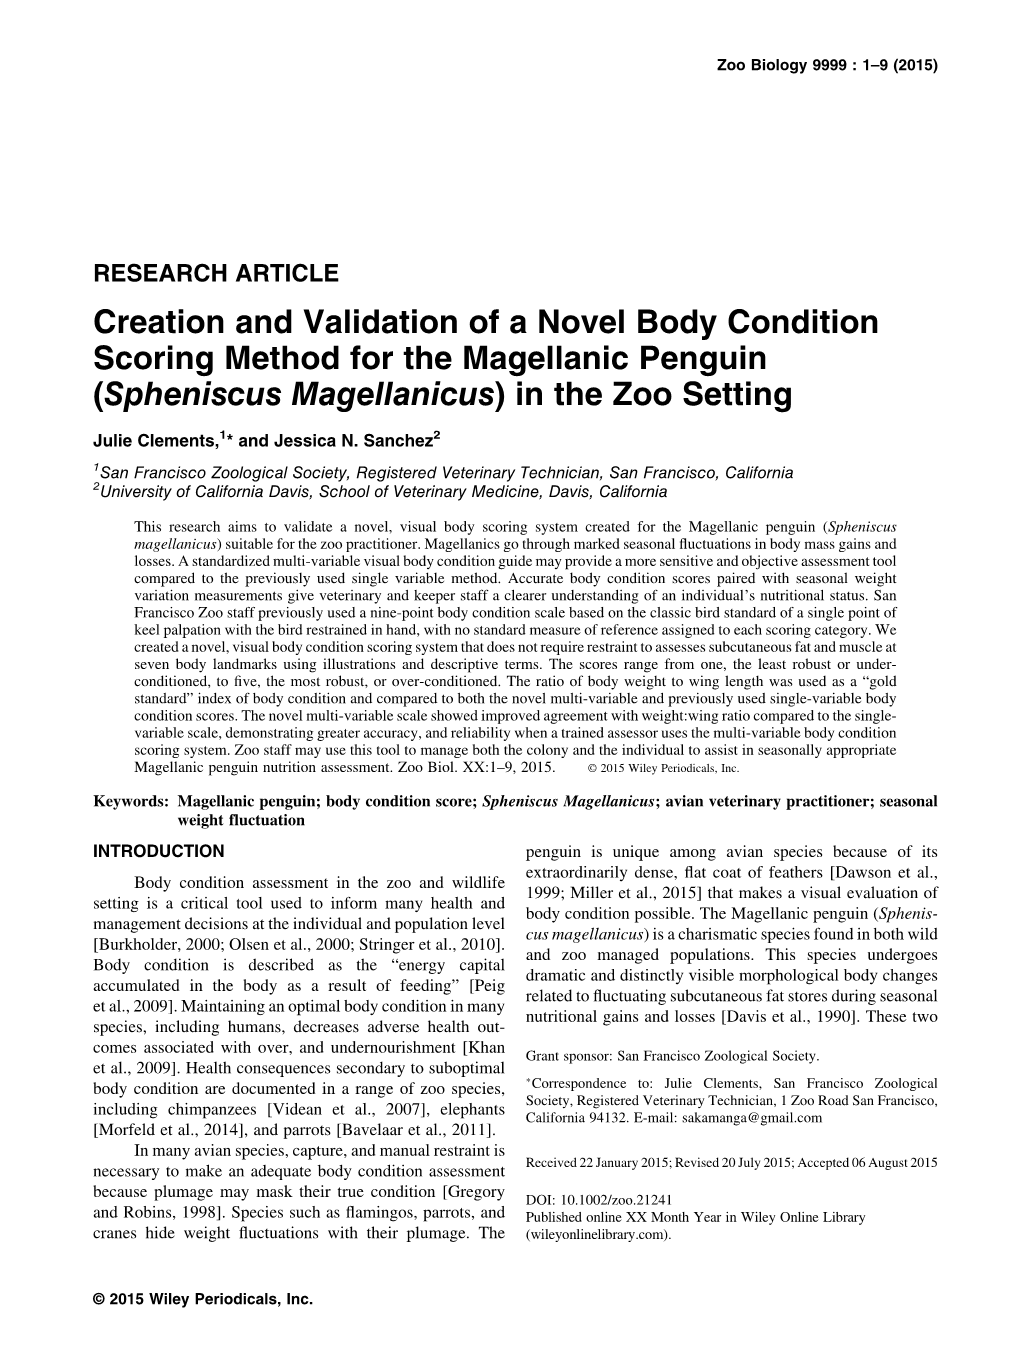 Creation and Validation of a Novel Body Condition Scoring Method for the Magellanic Penguin (Spheniscus Magellanicus) in the Zoo Setting